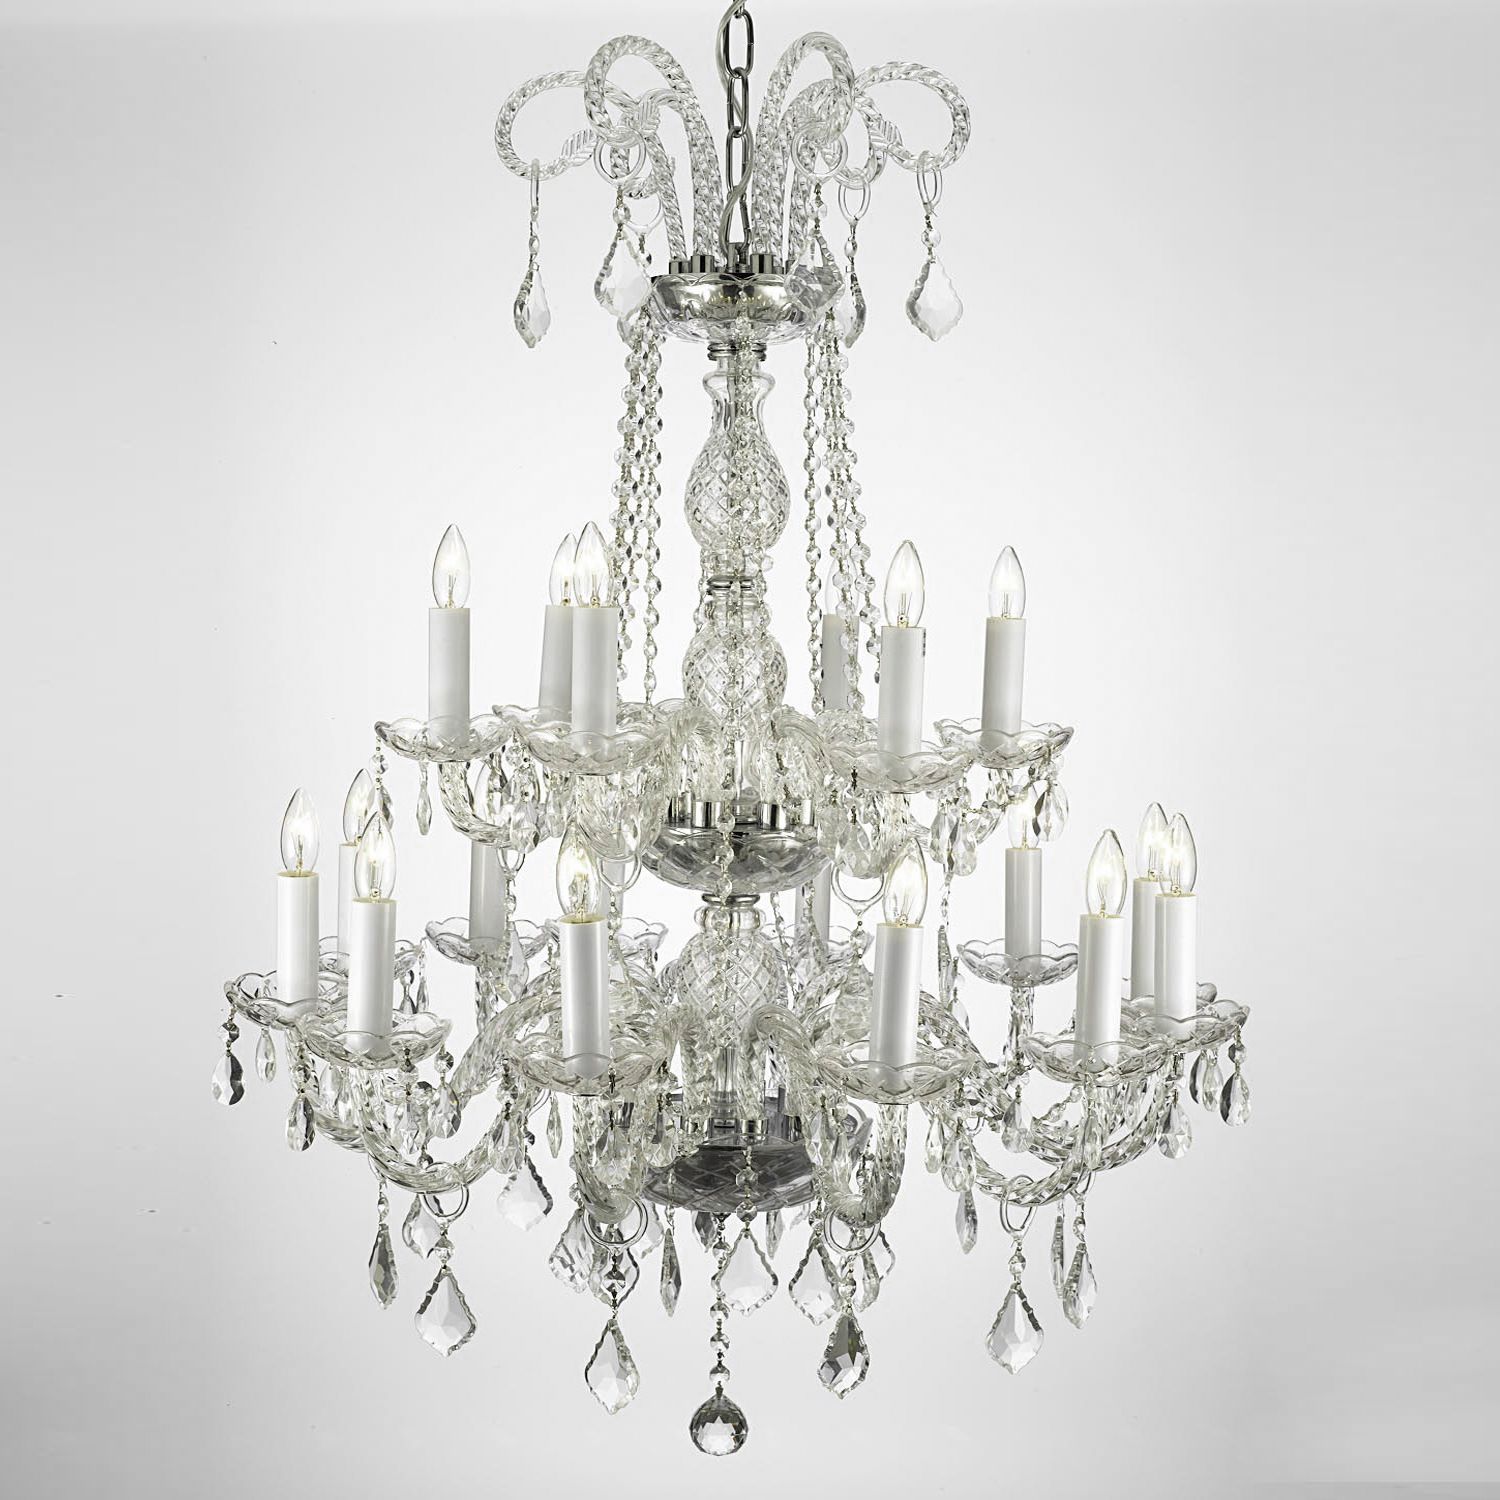 This Two Tier Chandelier Is Decorated With 100 Percent Regarding Marquette Two Tier Traditional Chandeliers (View 10 of 15)